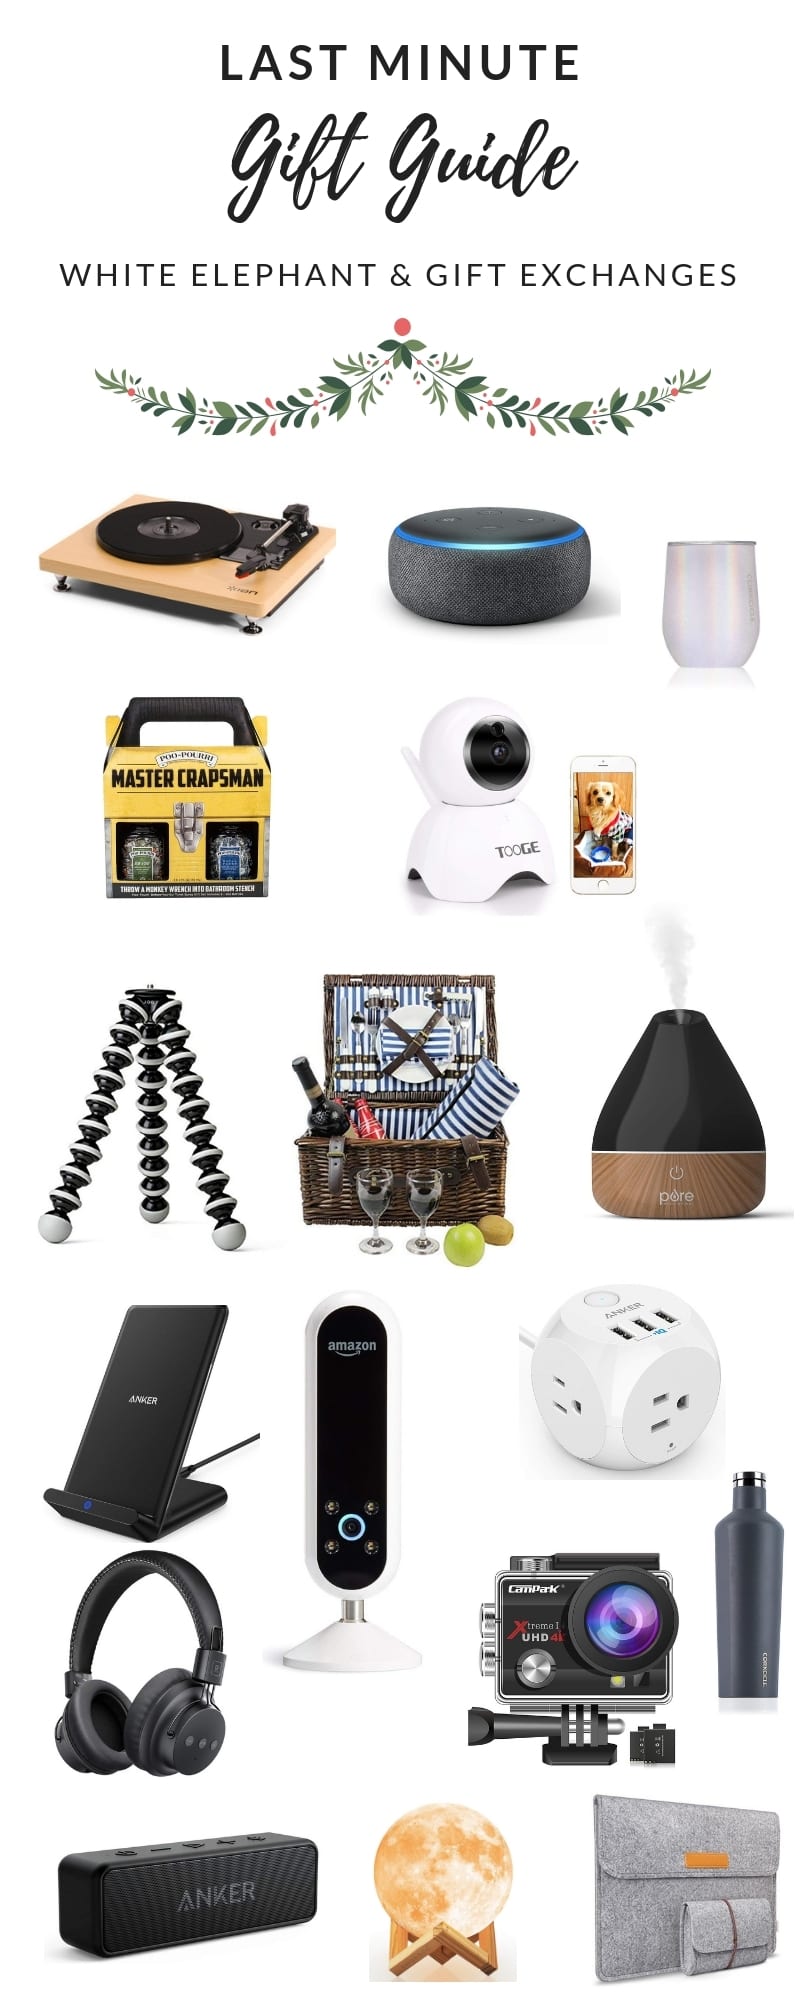 White elephant gift guide for under $50 and the official rules